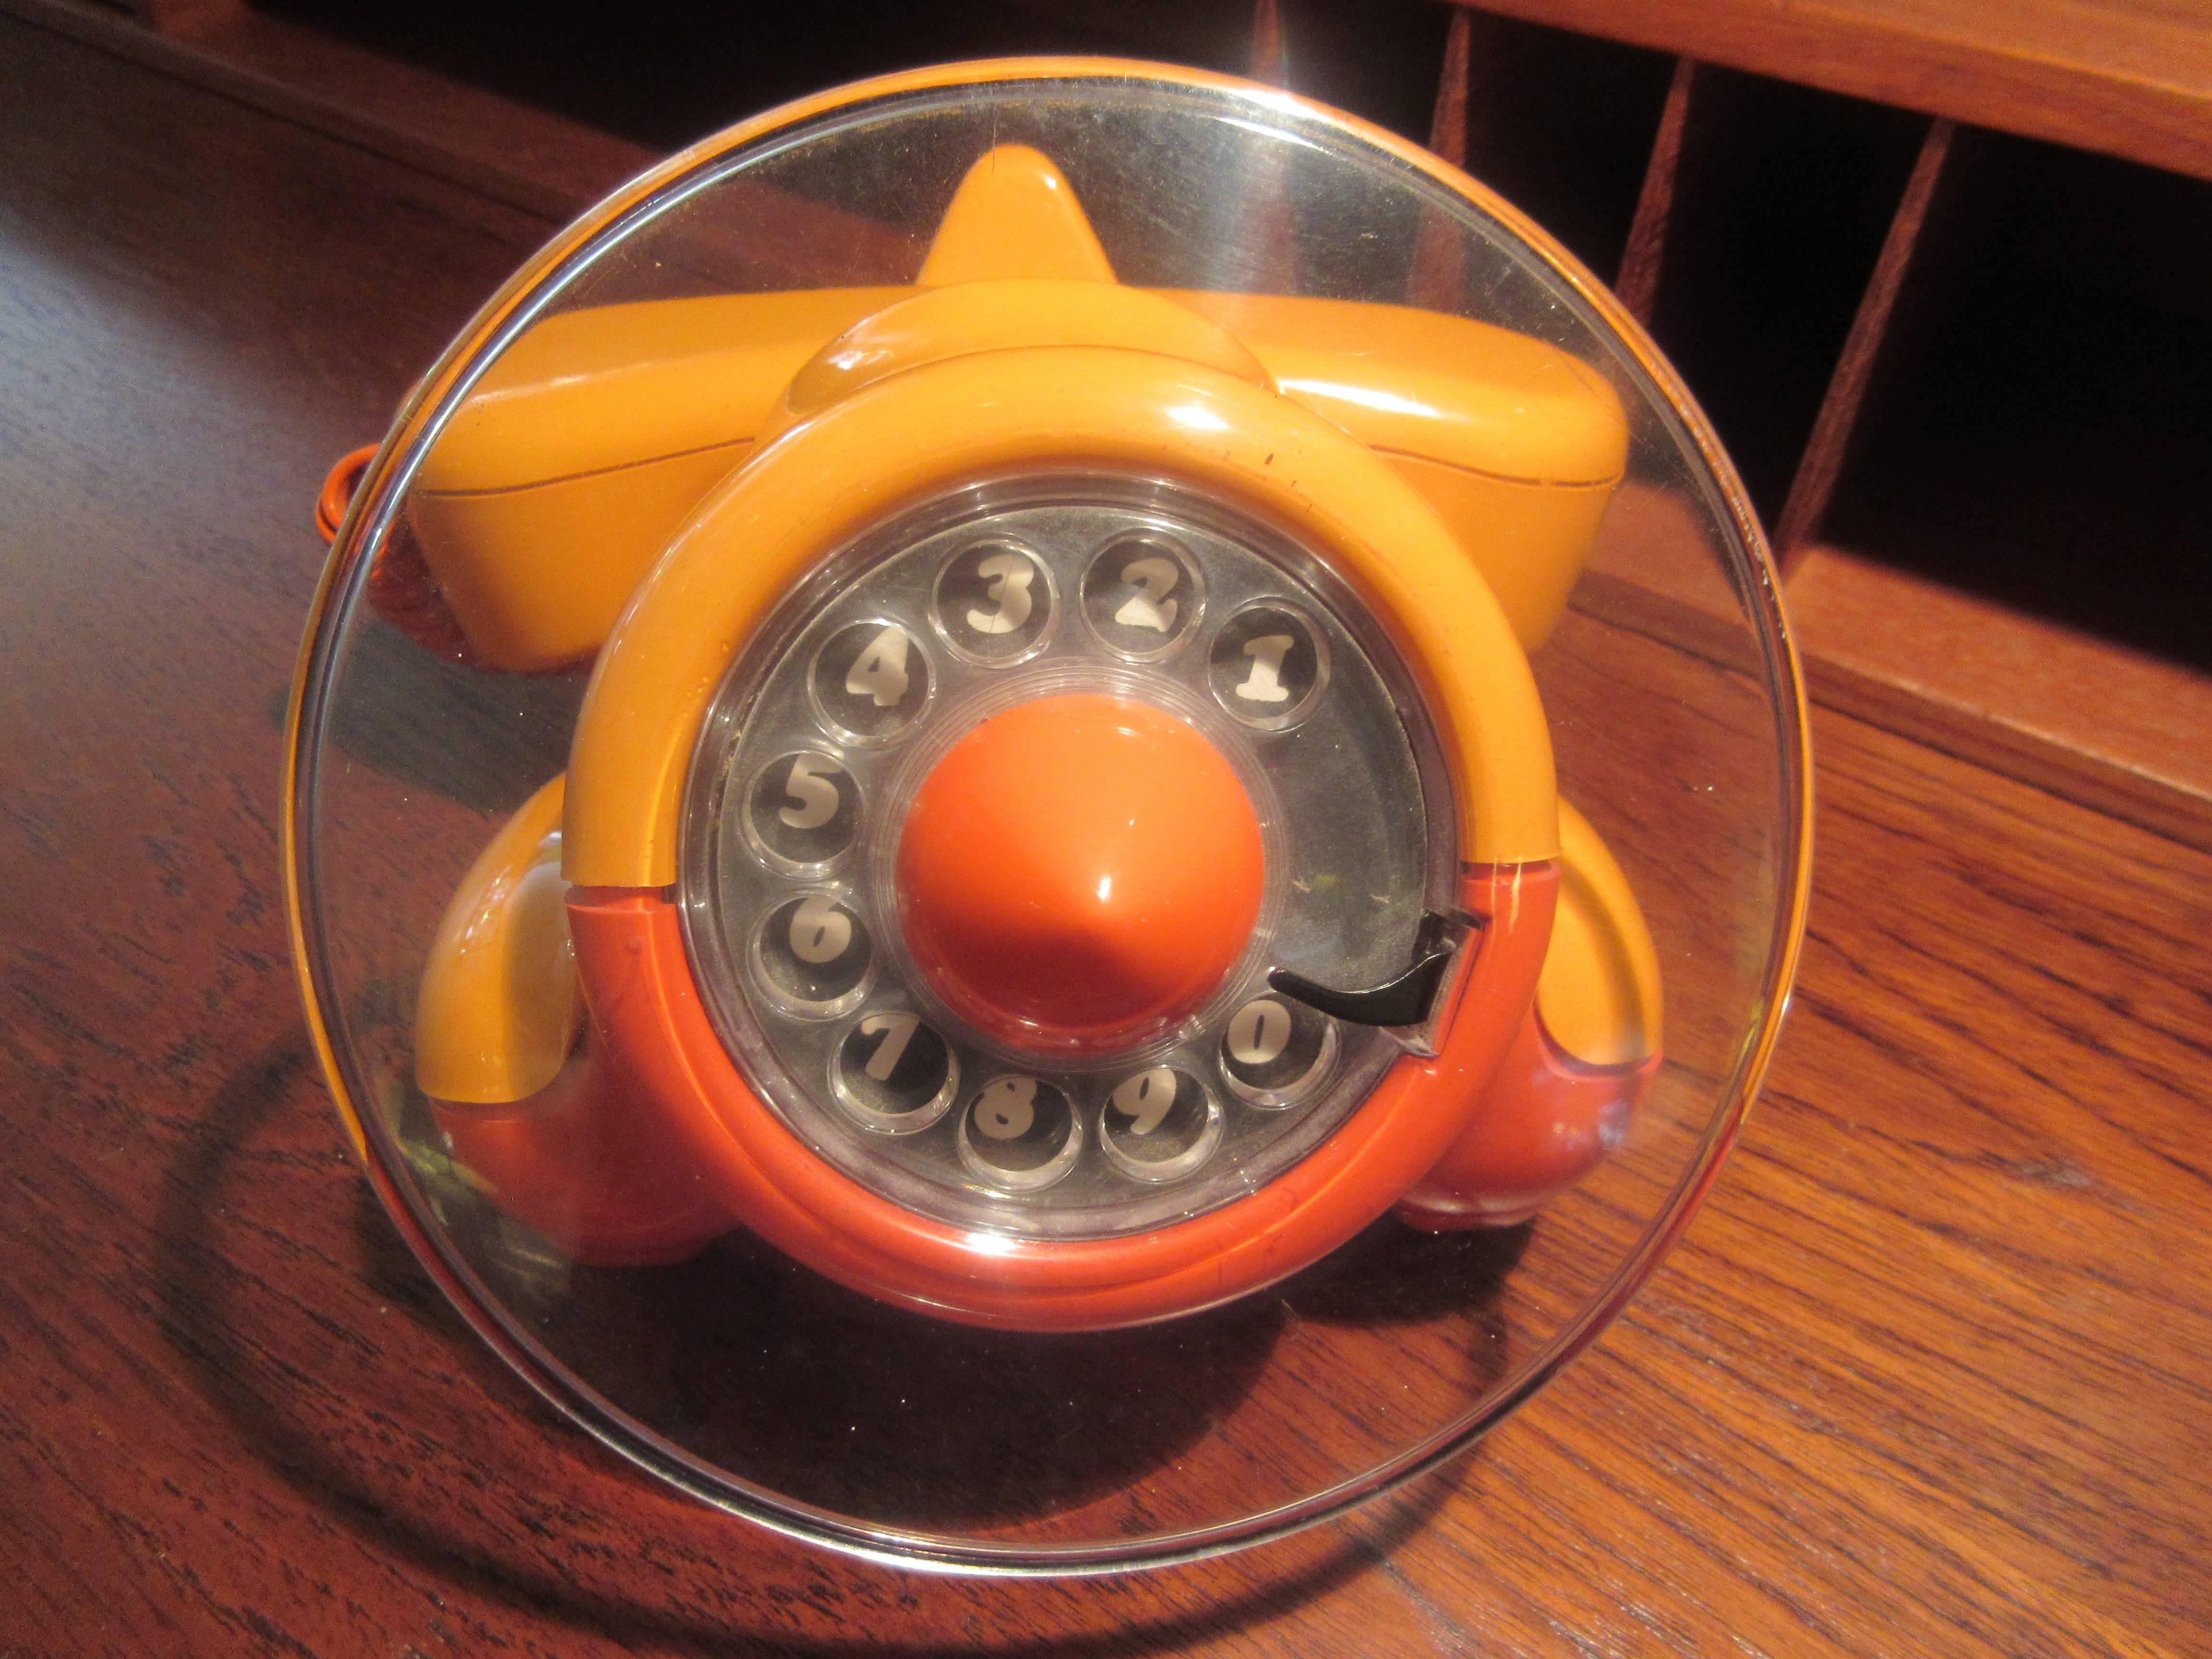 Whimsical plastic airplane phone from the 1960s-1970s.